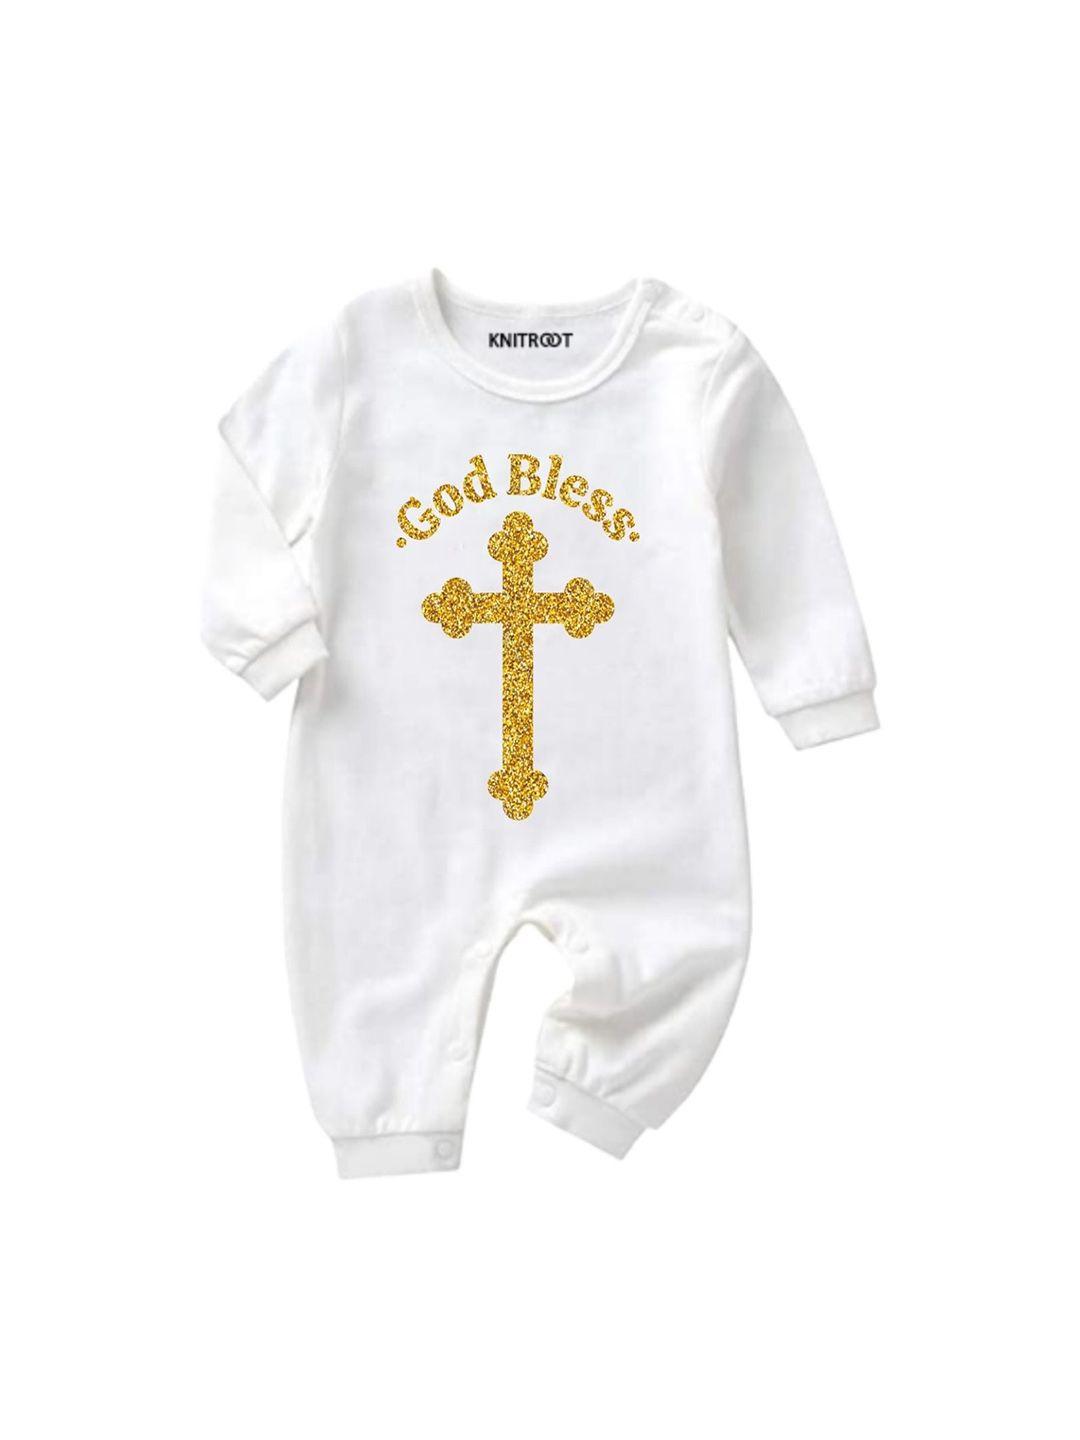 knitroot infants white & gold toned god bless print cotton rompers